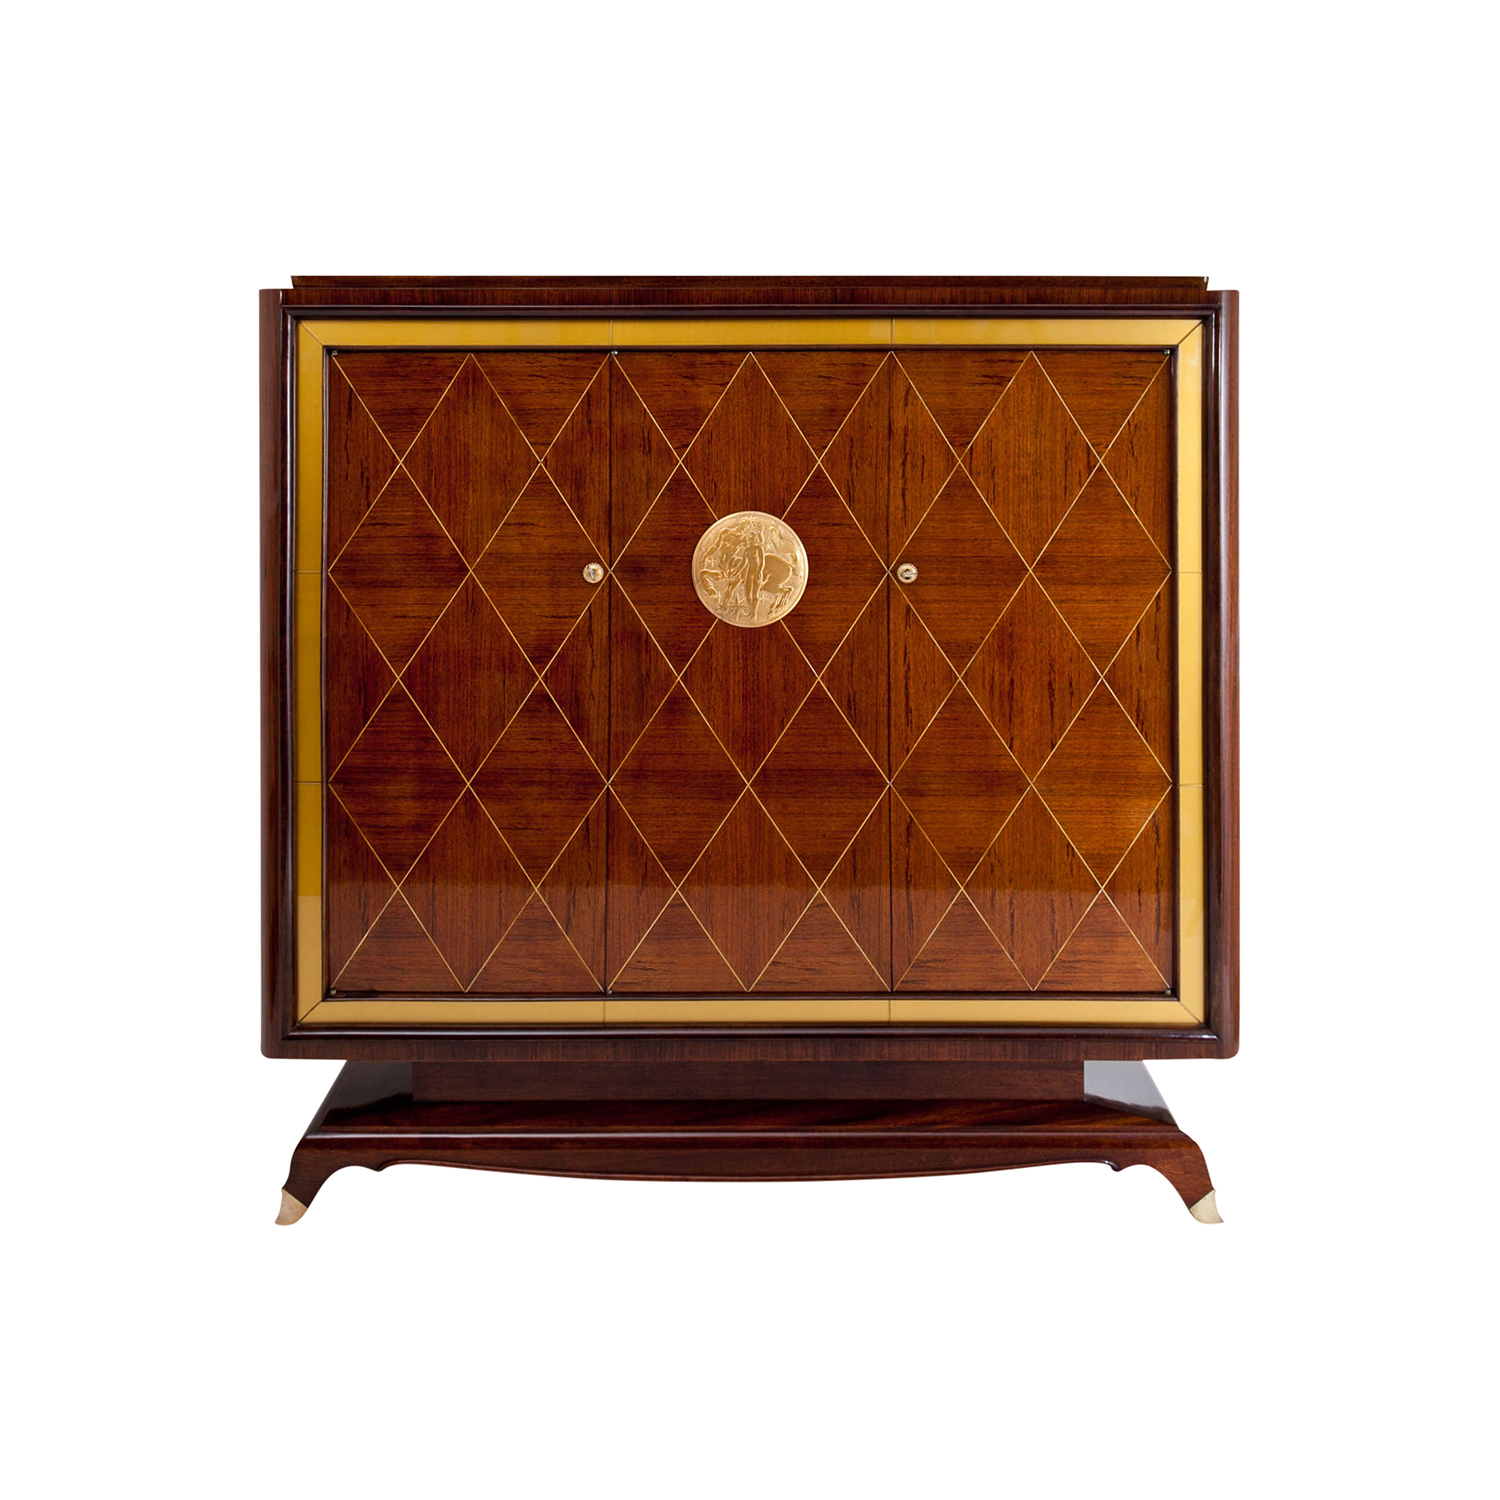 A vintage 1940s Art Deco Rosewood cabinet produced by Rambaudi-Dantoine in good condition. Circa 1940 - 1950, France.